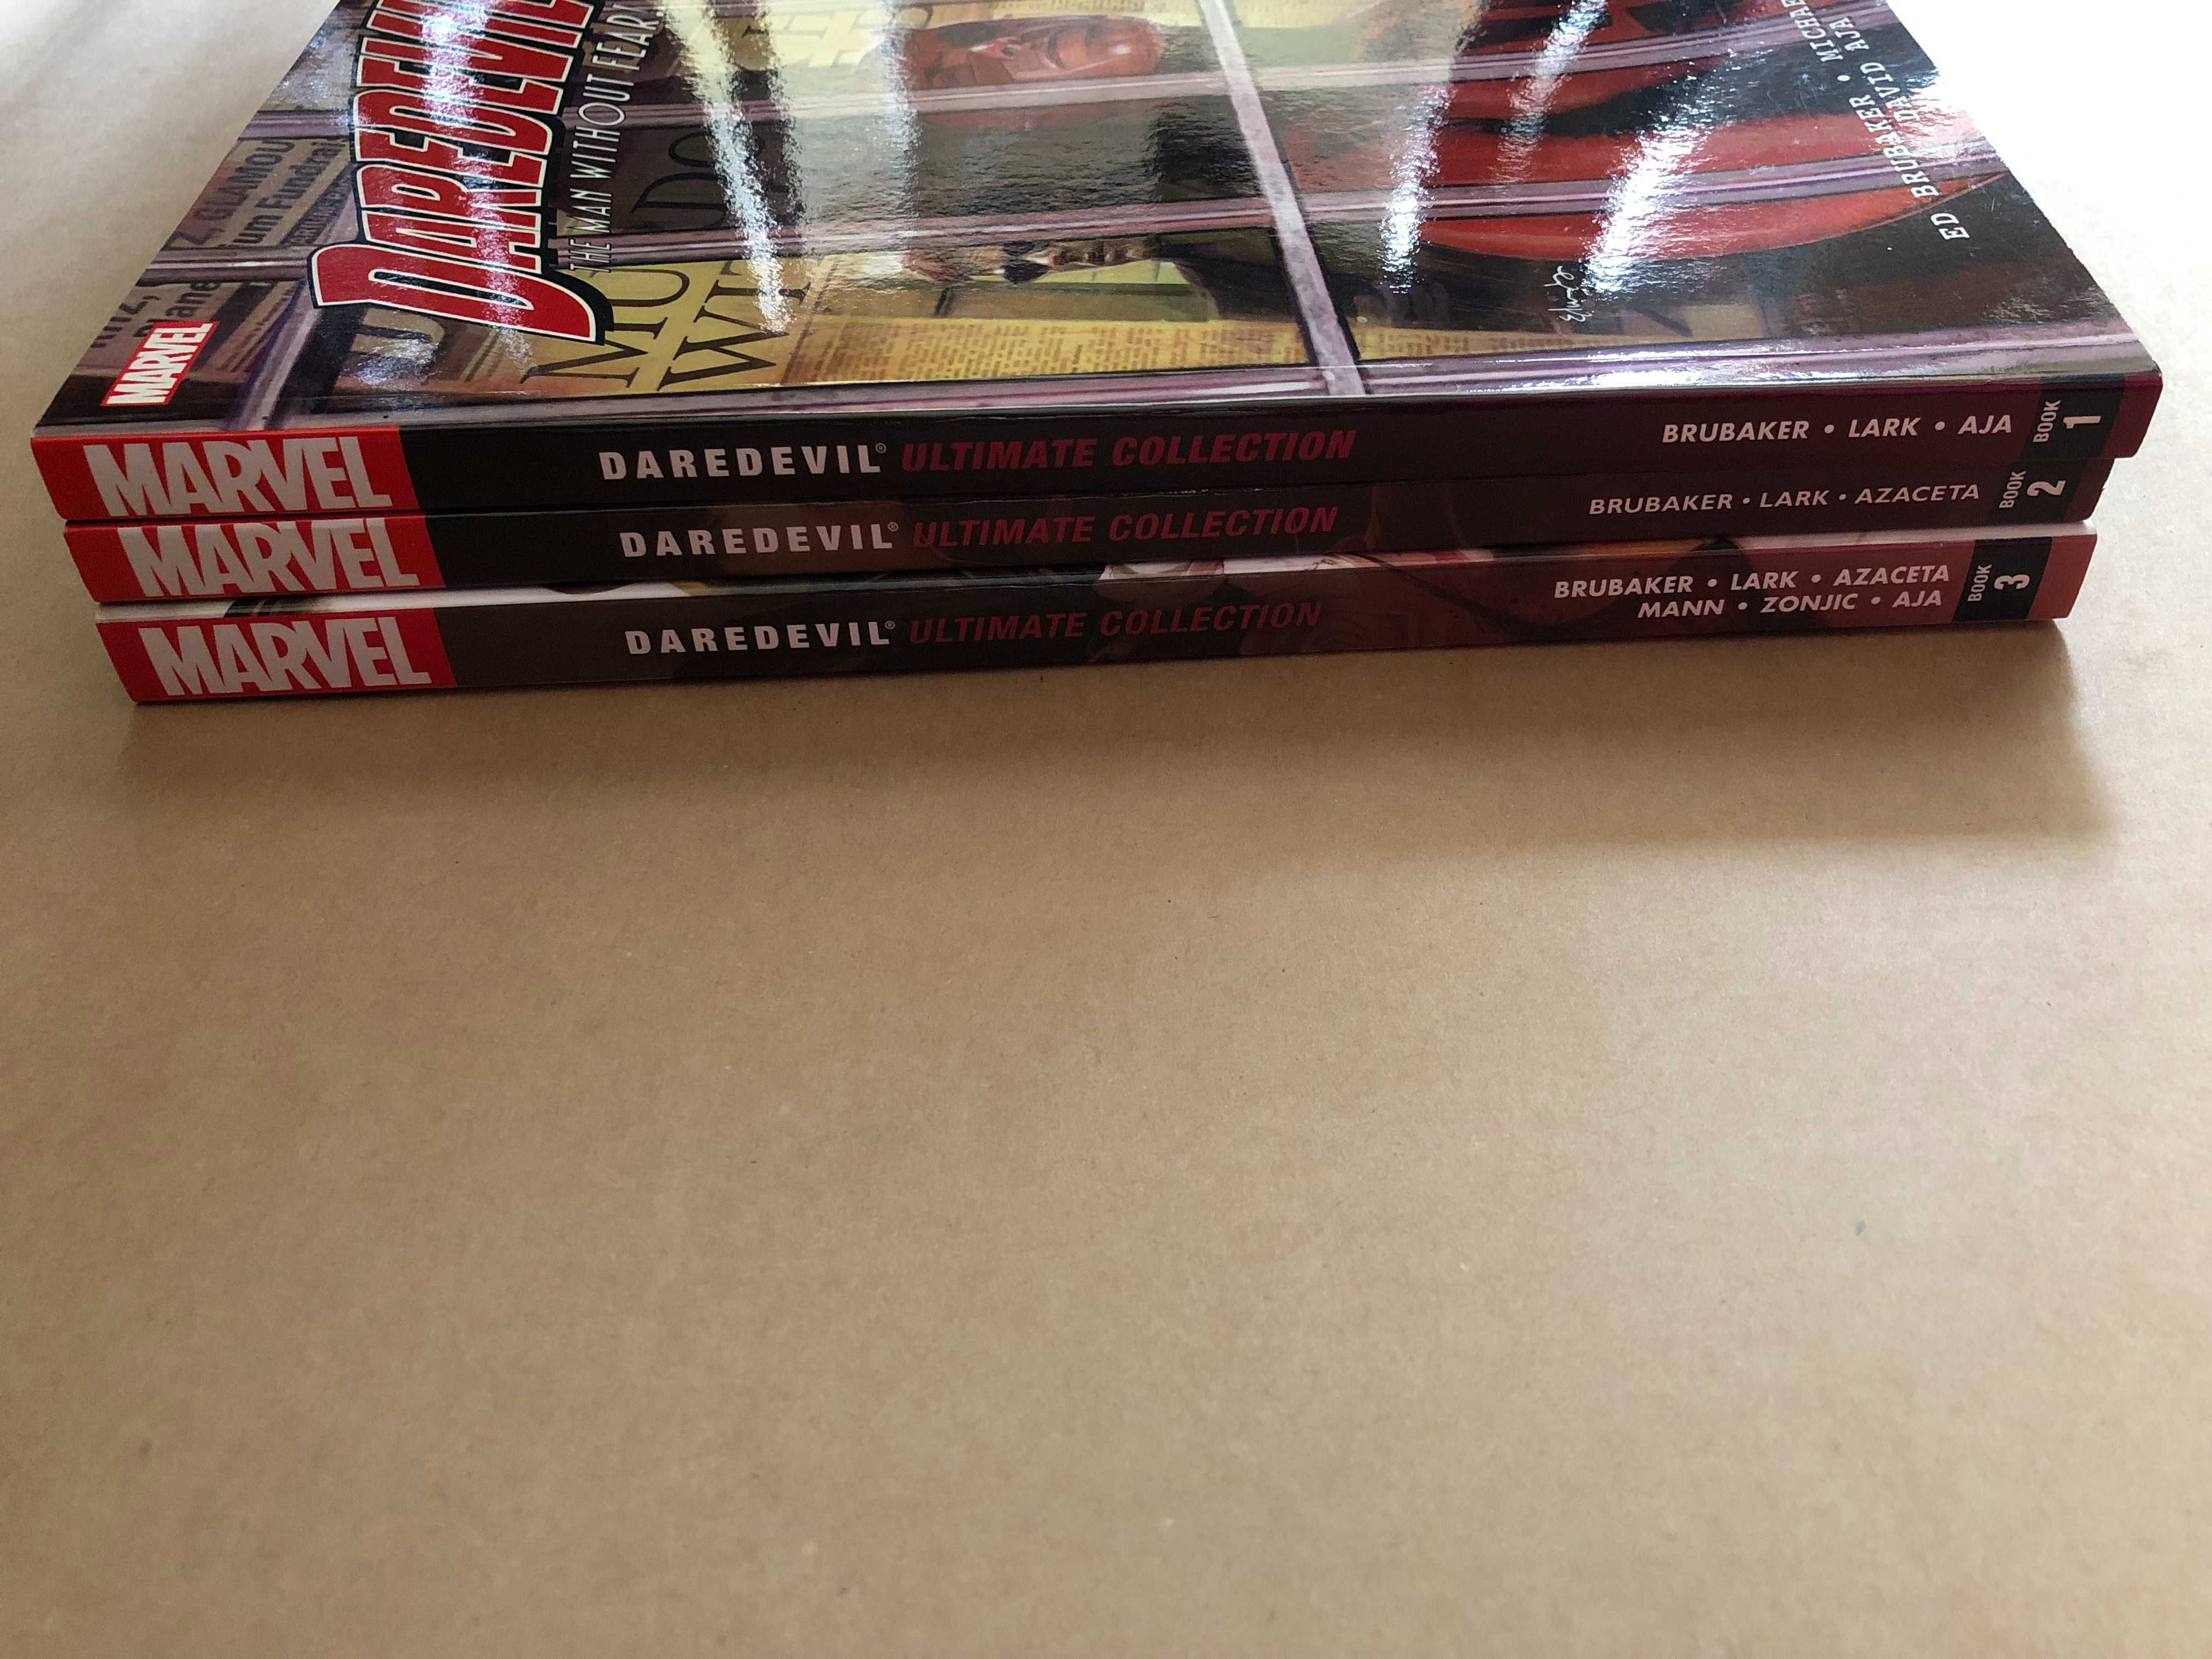 DAREDEVIL by Brubaker and Lark Ultimate Collection 1-3 - Marvel